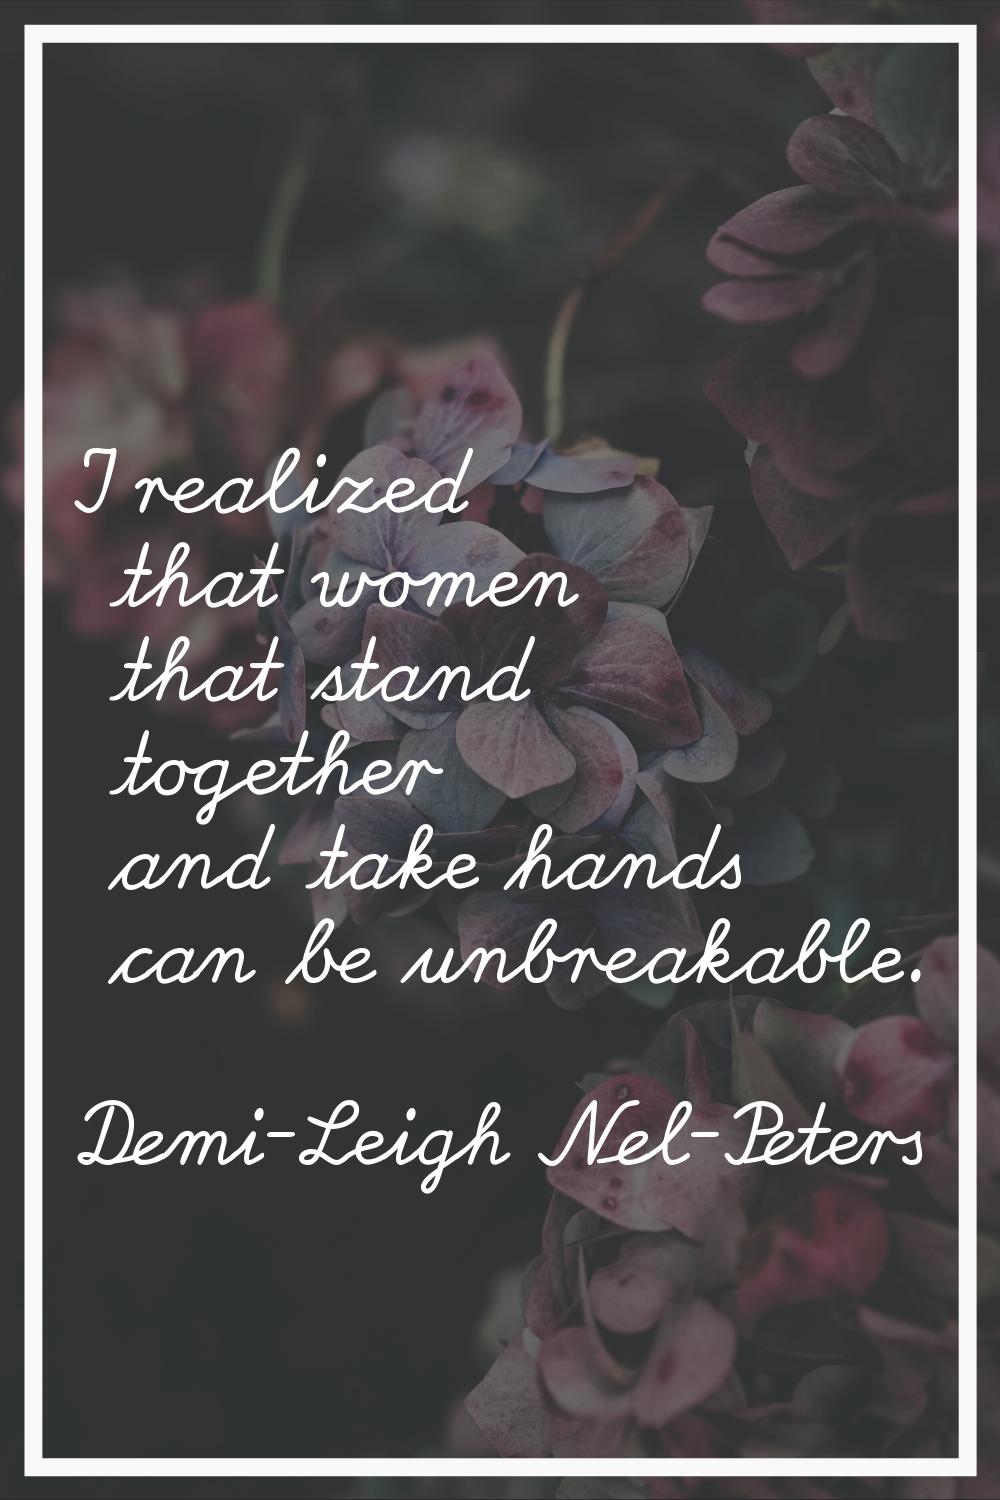 I realized that women that stand together and take hands can be unbreakable.